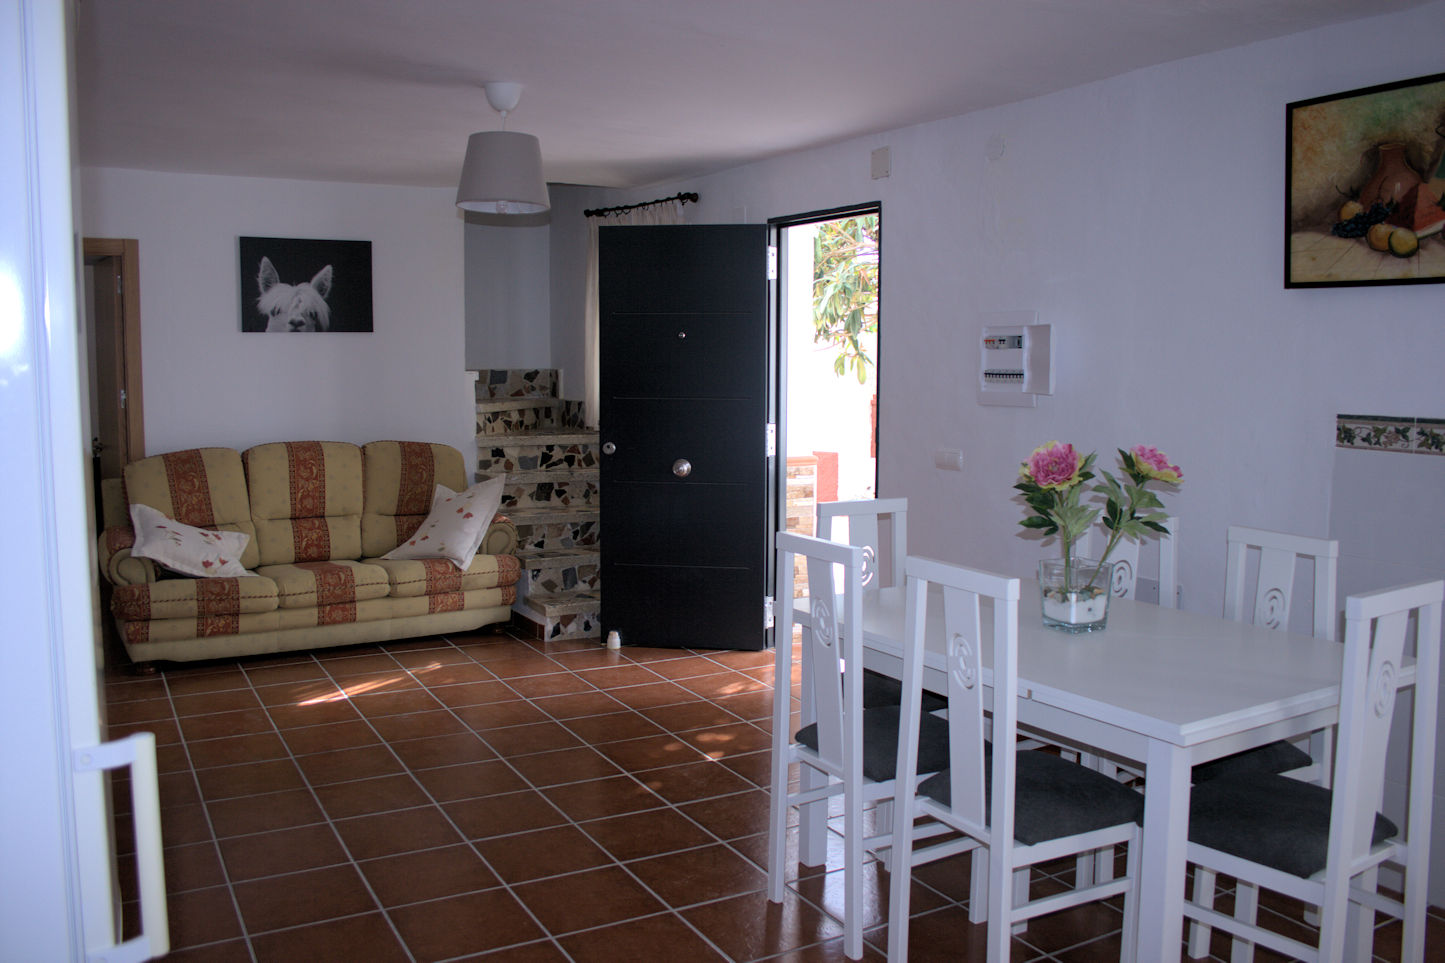 House for rent in Valdés